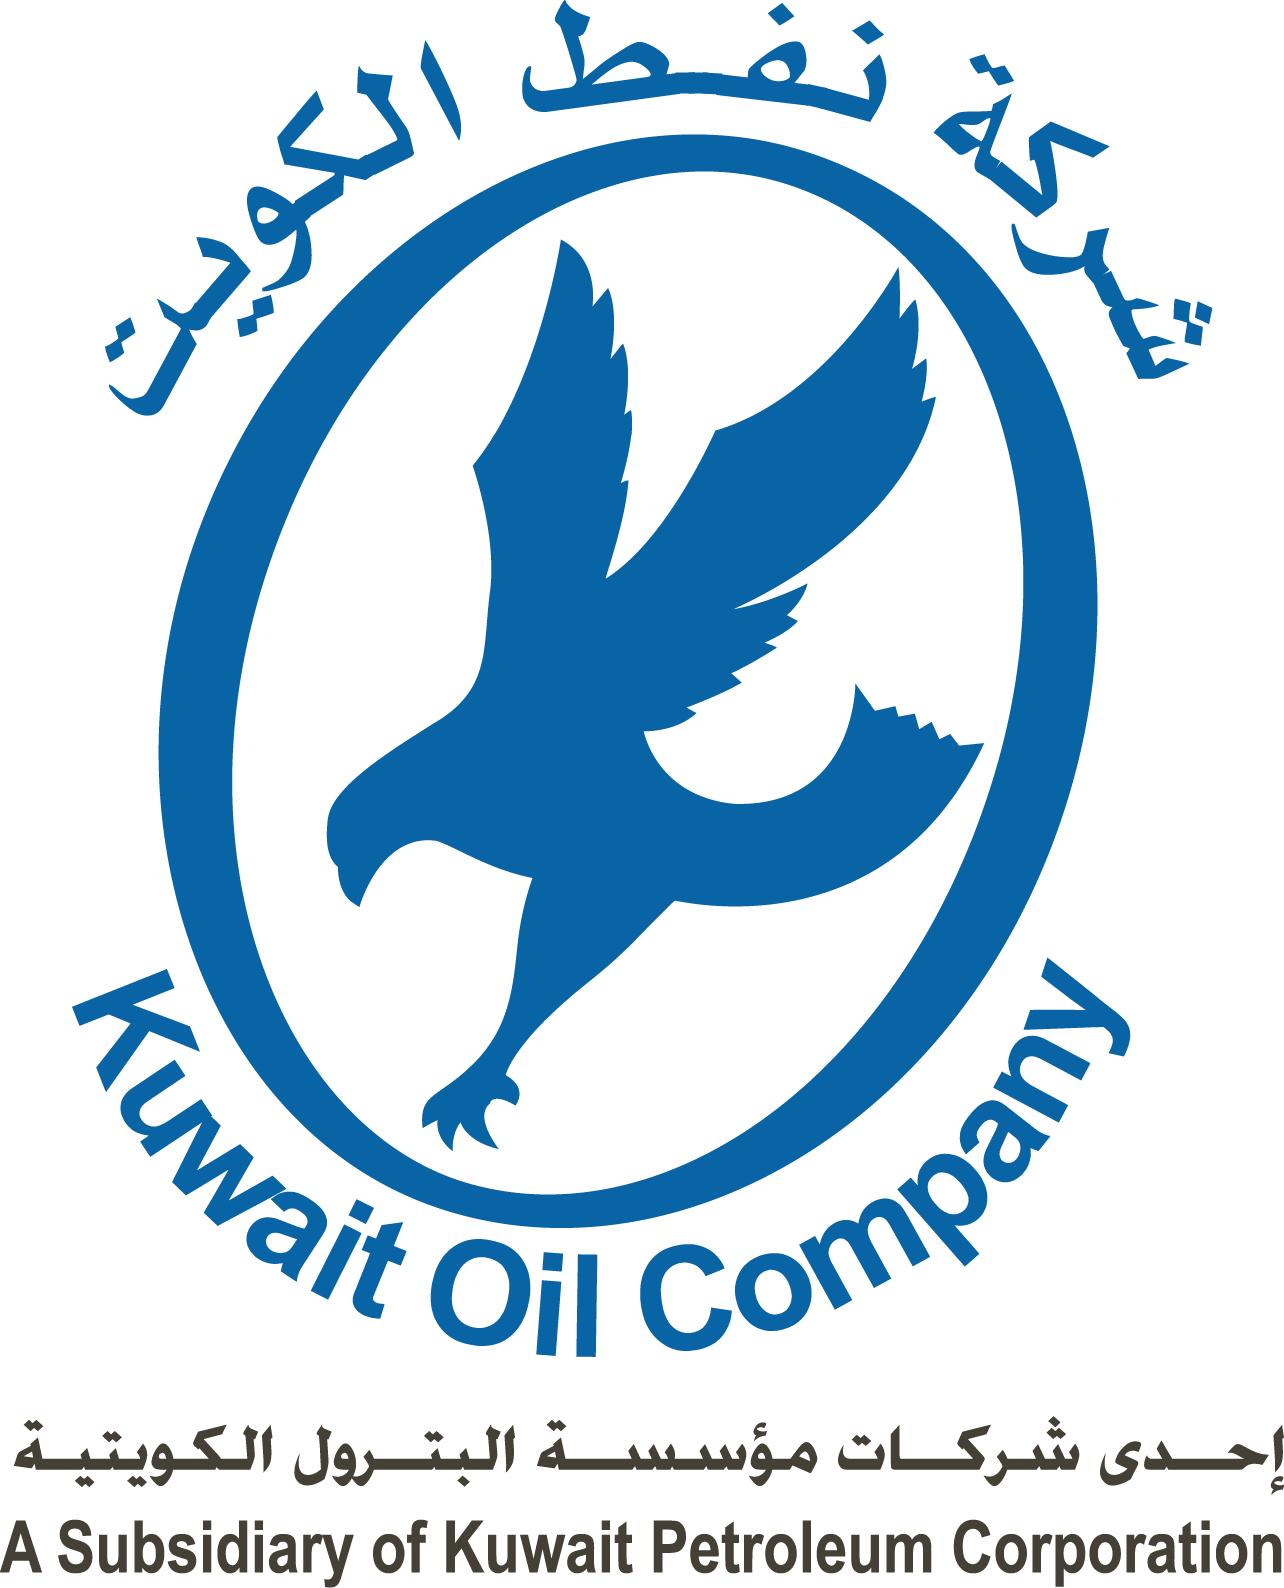 Kuwait Oil Co says dealing with 'limited fire' at well where oil leak occurred